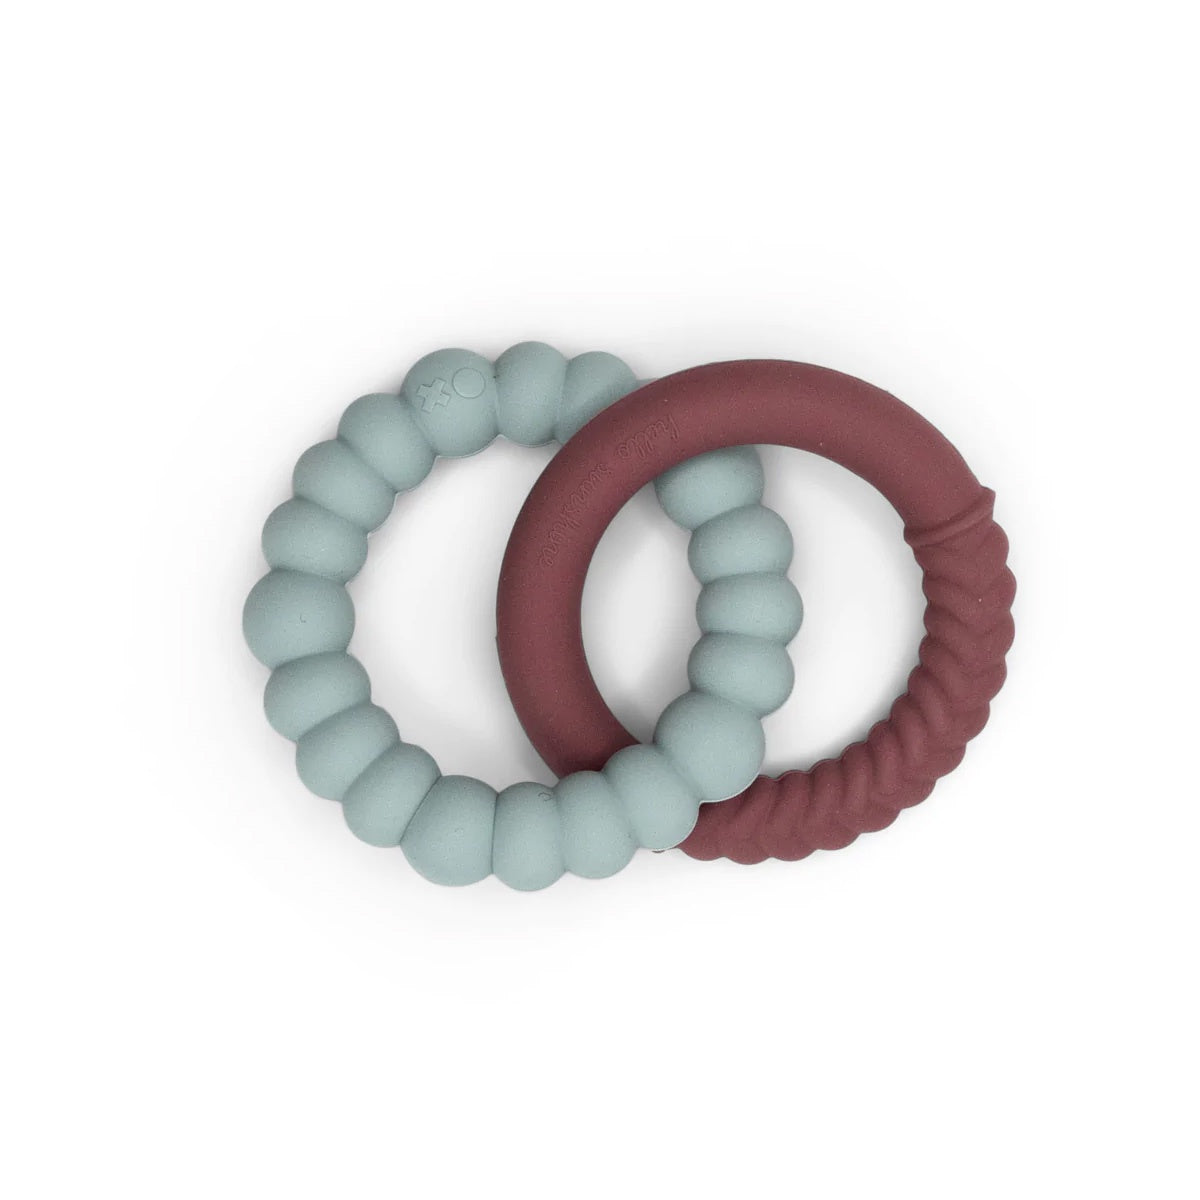 Jellystone Sunshine Teether - Berry and Sage